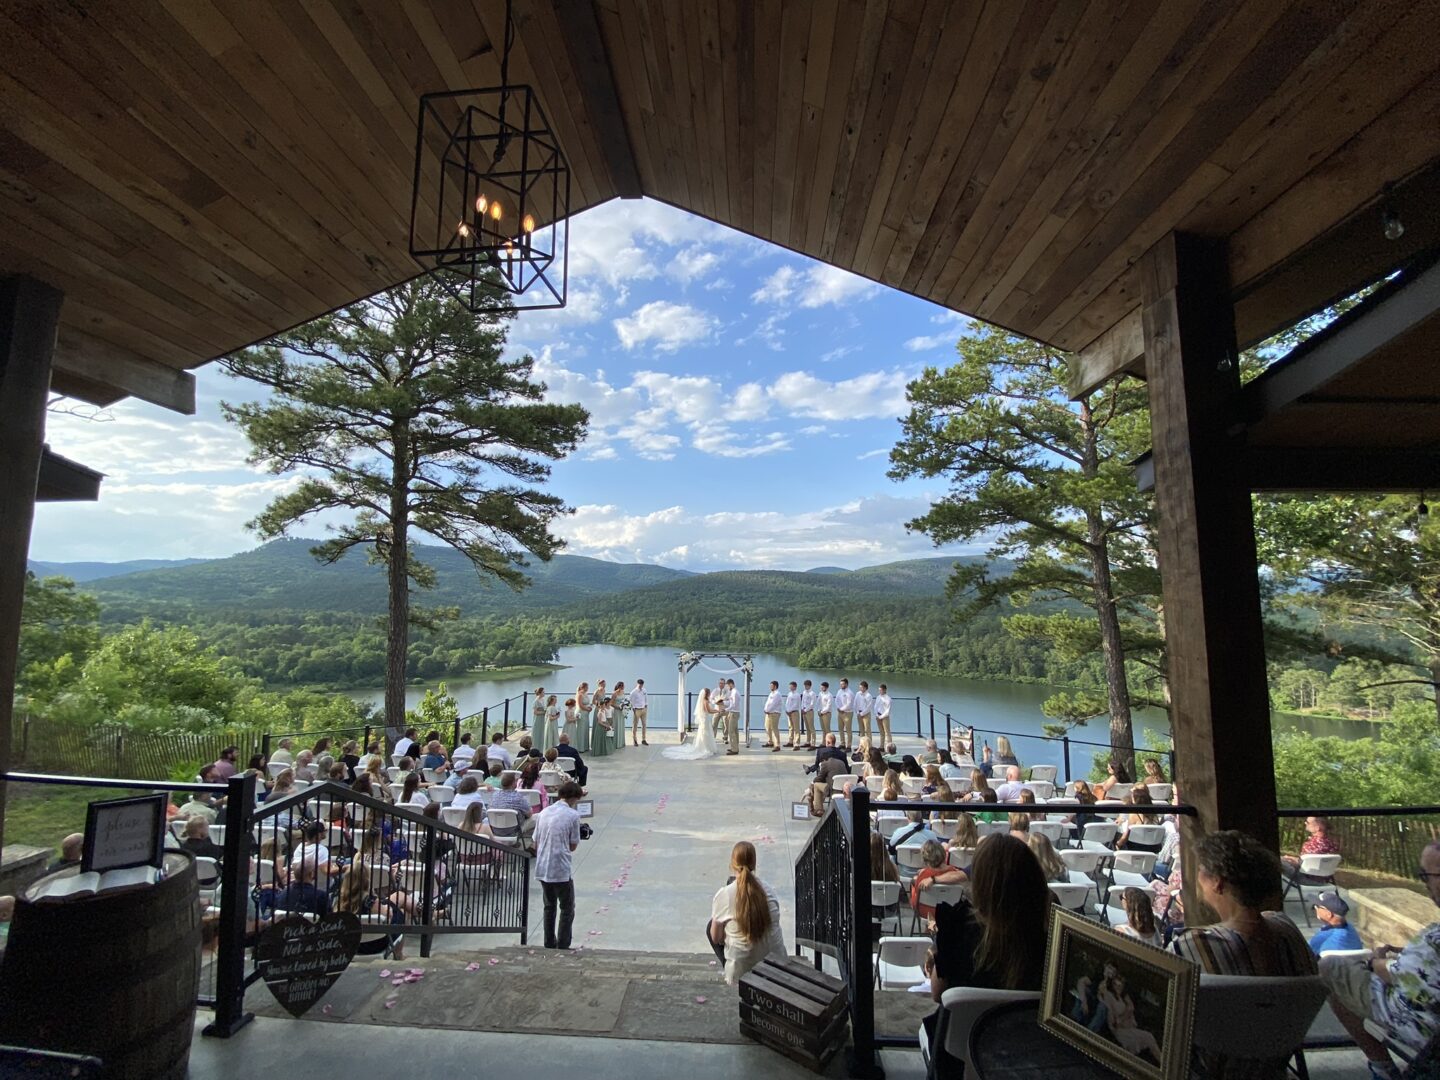 A wedding ceremony is set up on the patio.